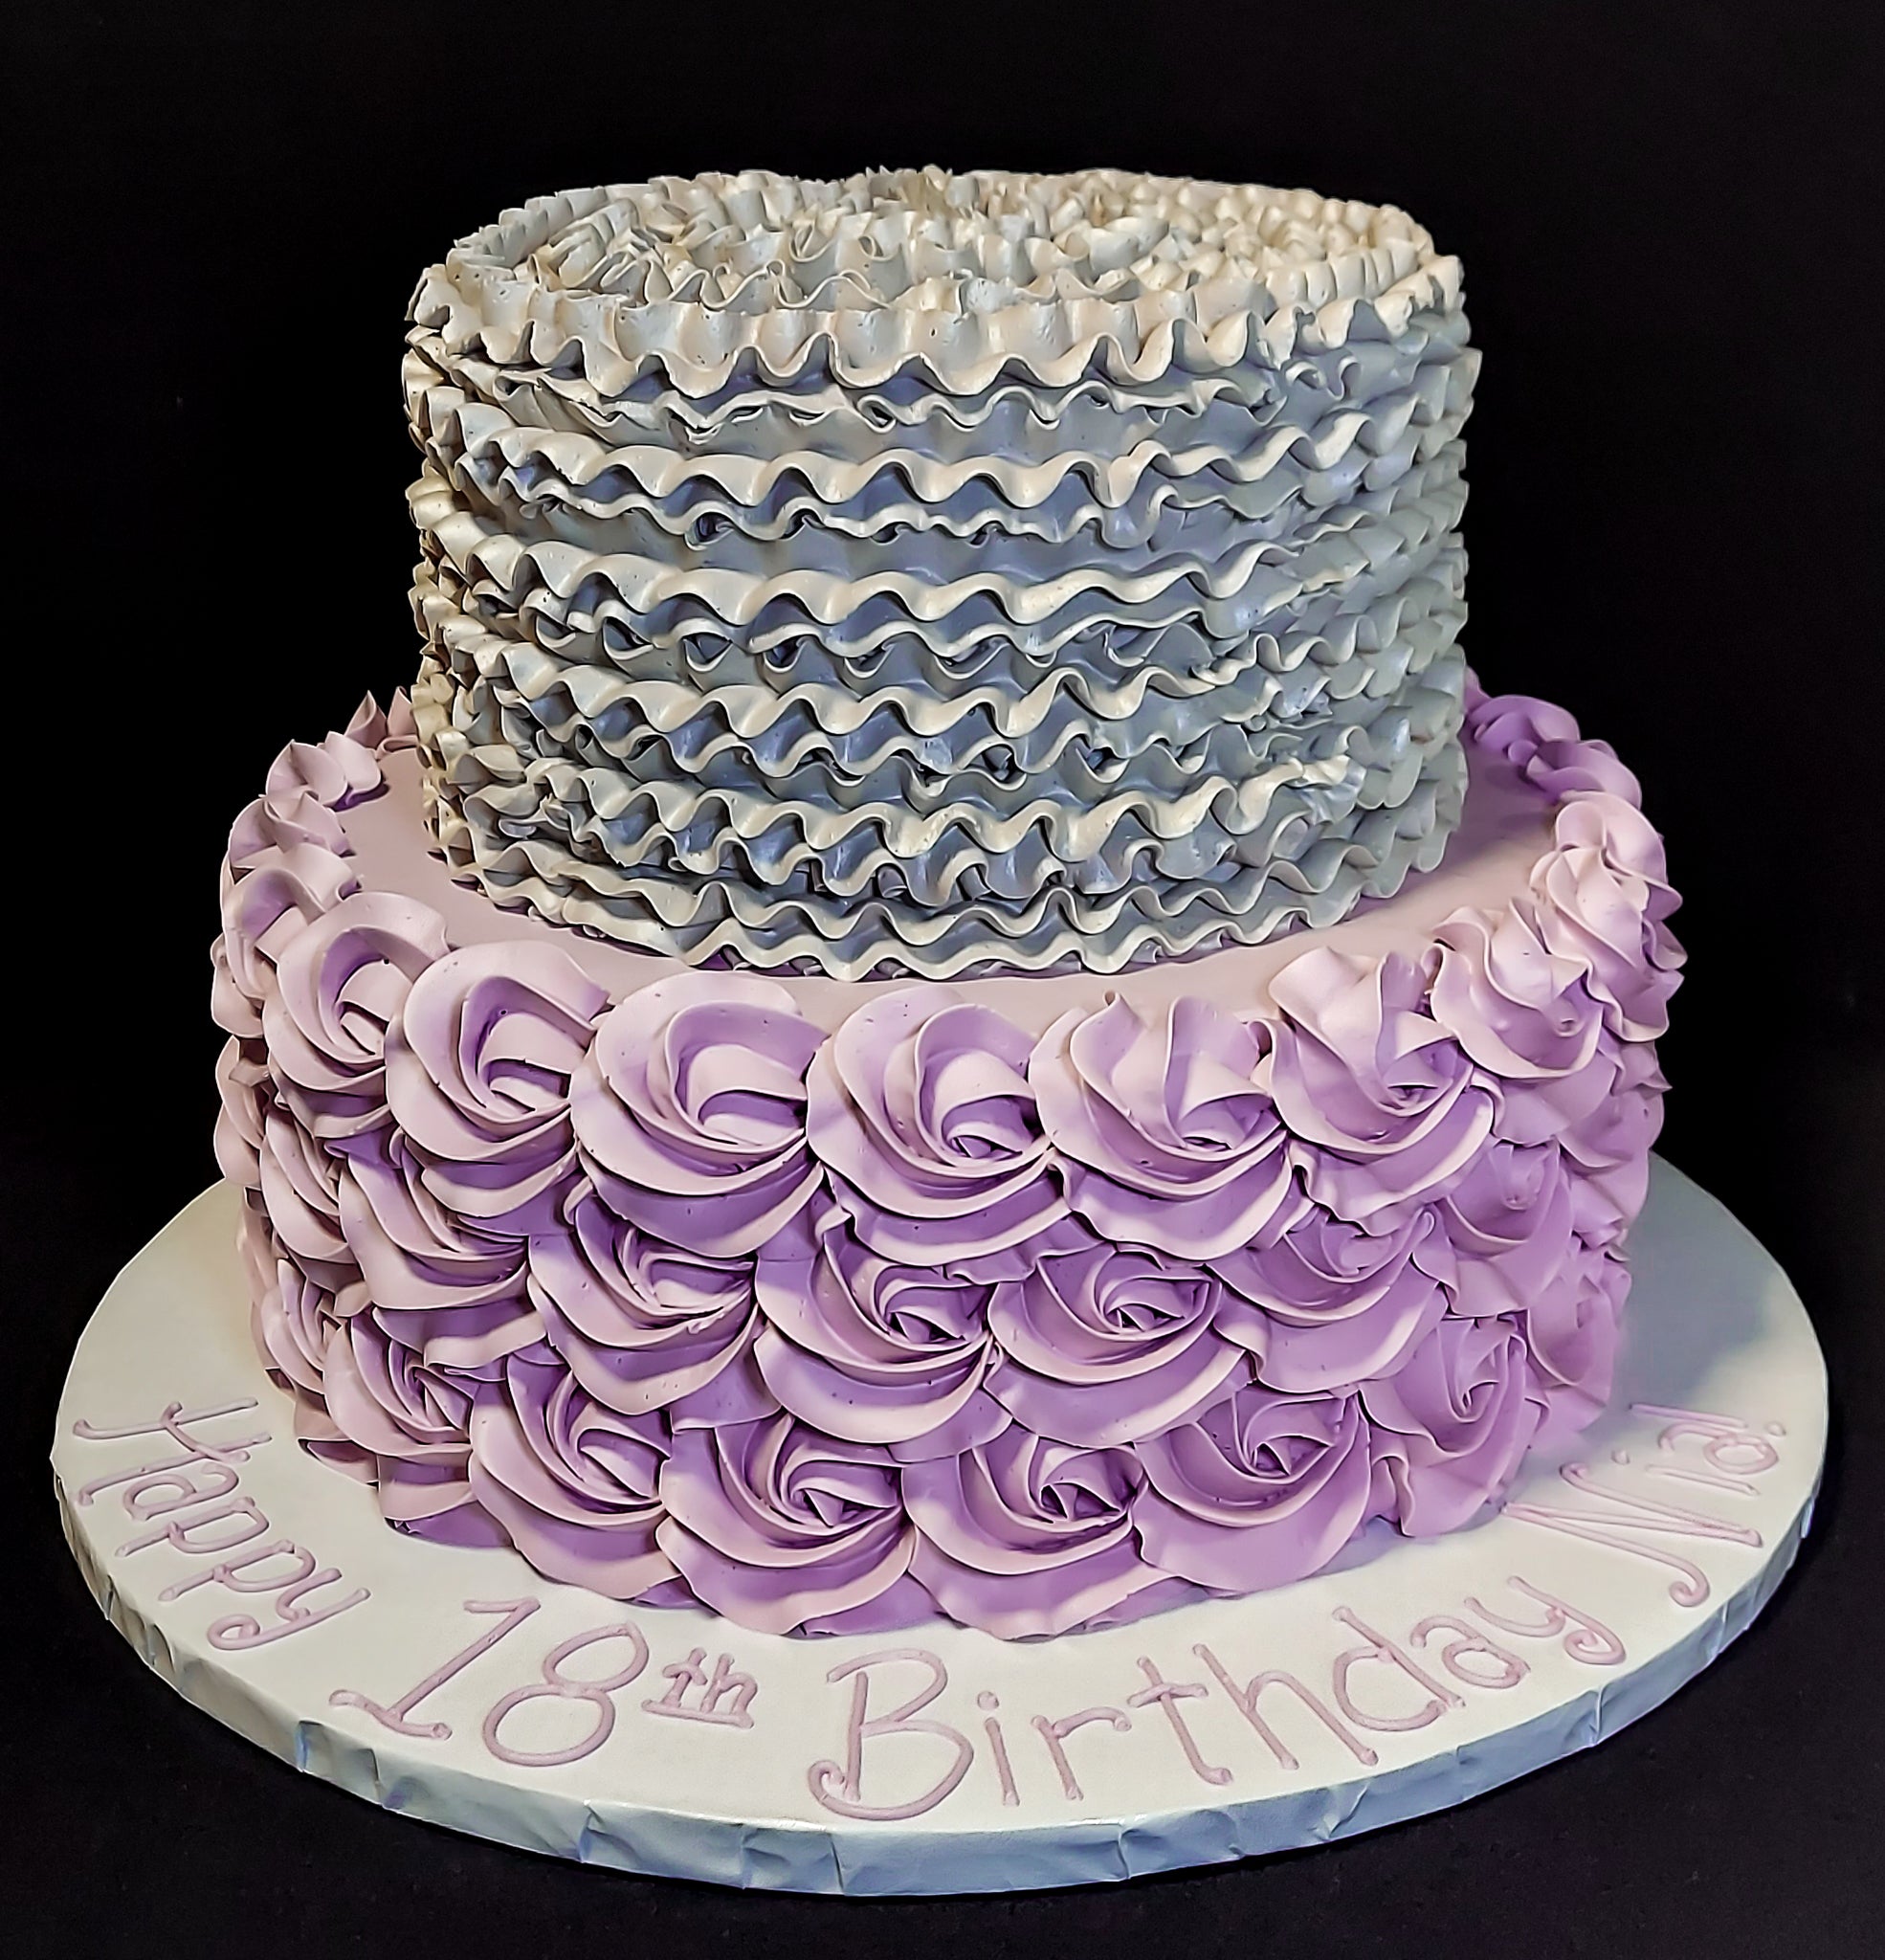 2 Tier Chocolate Cake | Wedding Birthday Cakes Delivery | Gift My Emotions